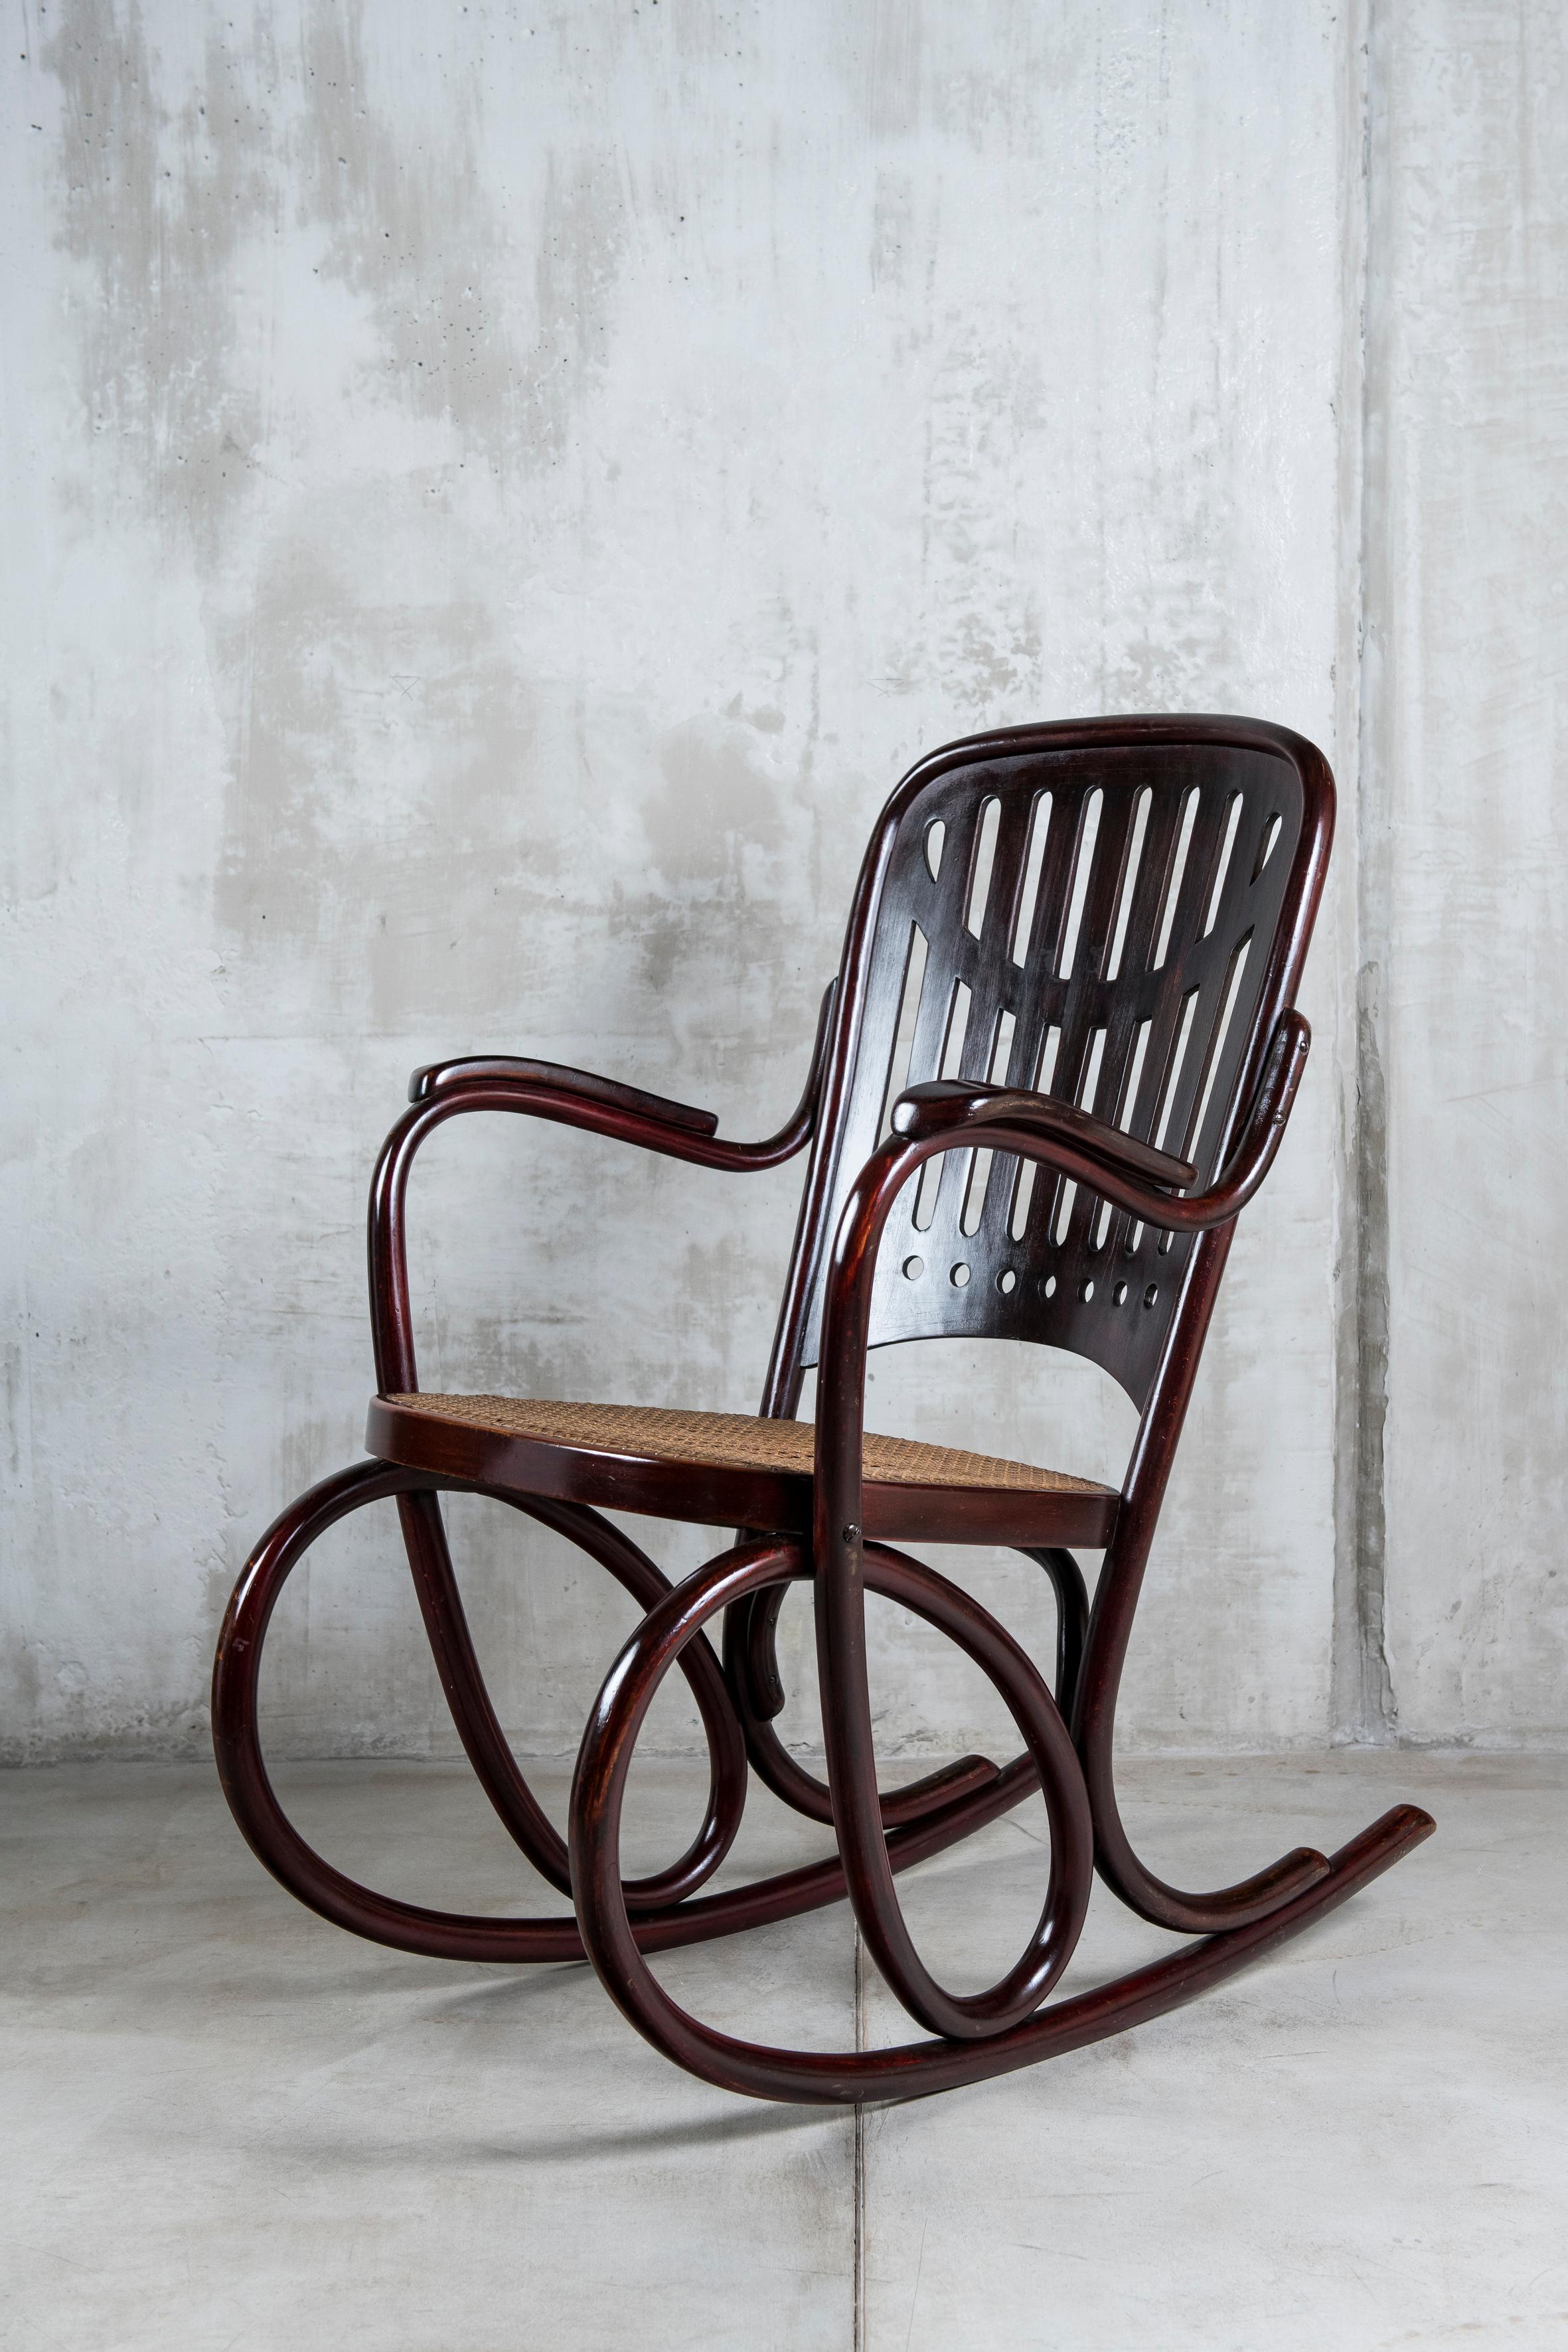 Thonet rocking chair, model number 71. Vienna, 1910. Signed Thonet Bellow.